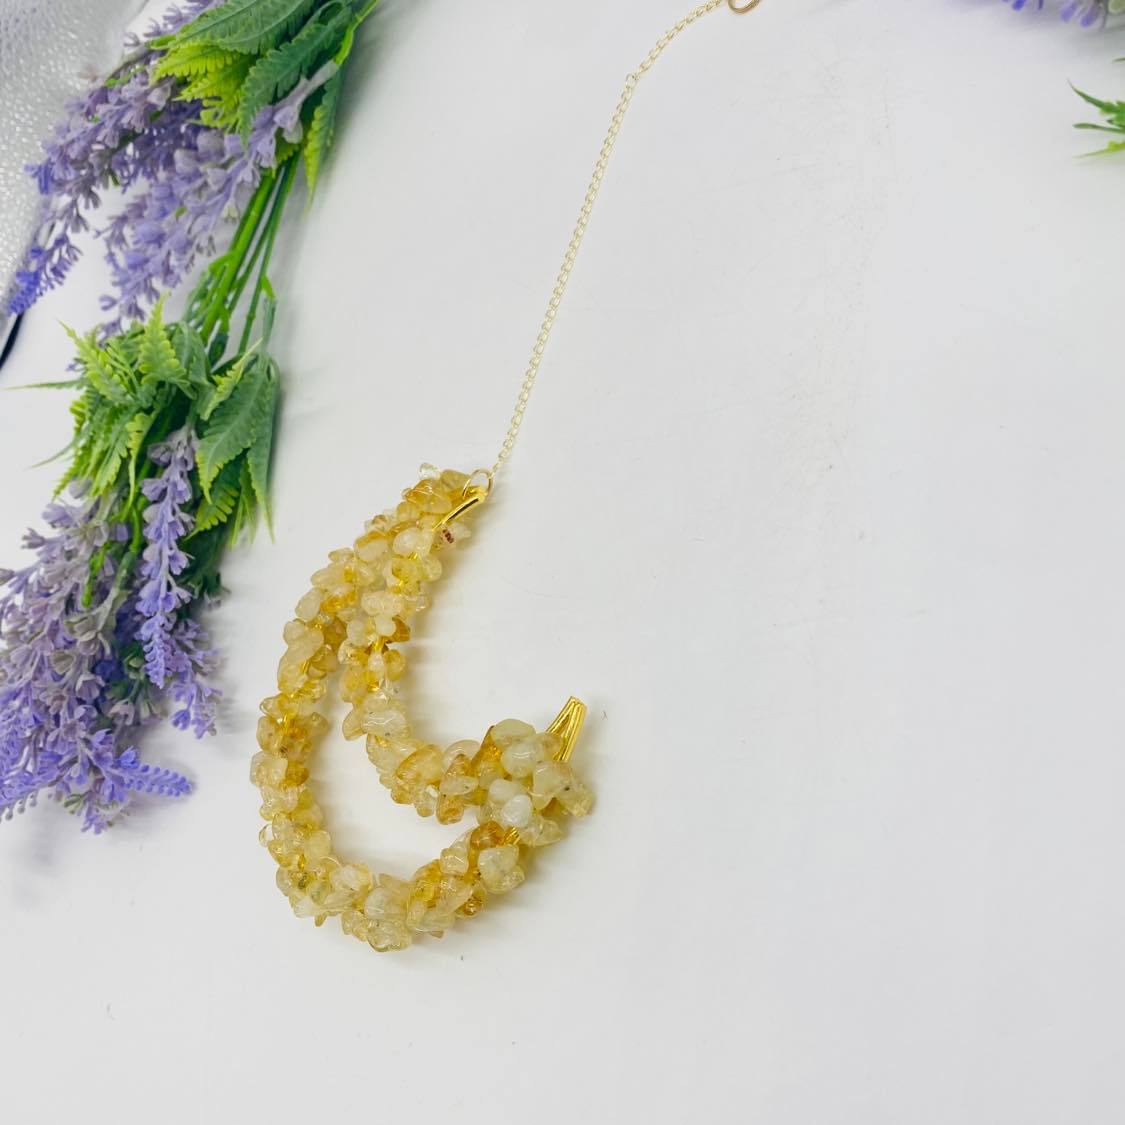 Crystal Hanging, Citrine Wall Hanging, Crescent Moon Hanging, Handmade Decor, Wall Decor,  Gift For Her, Unique Room Decor